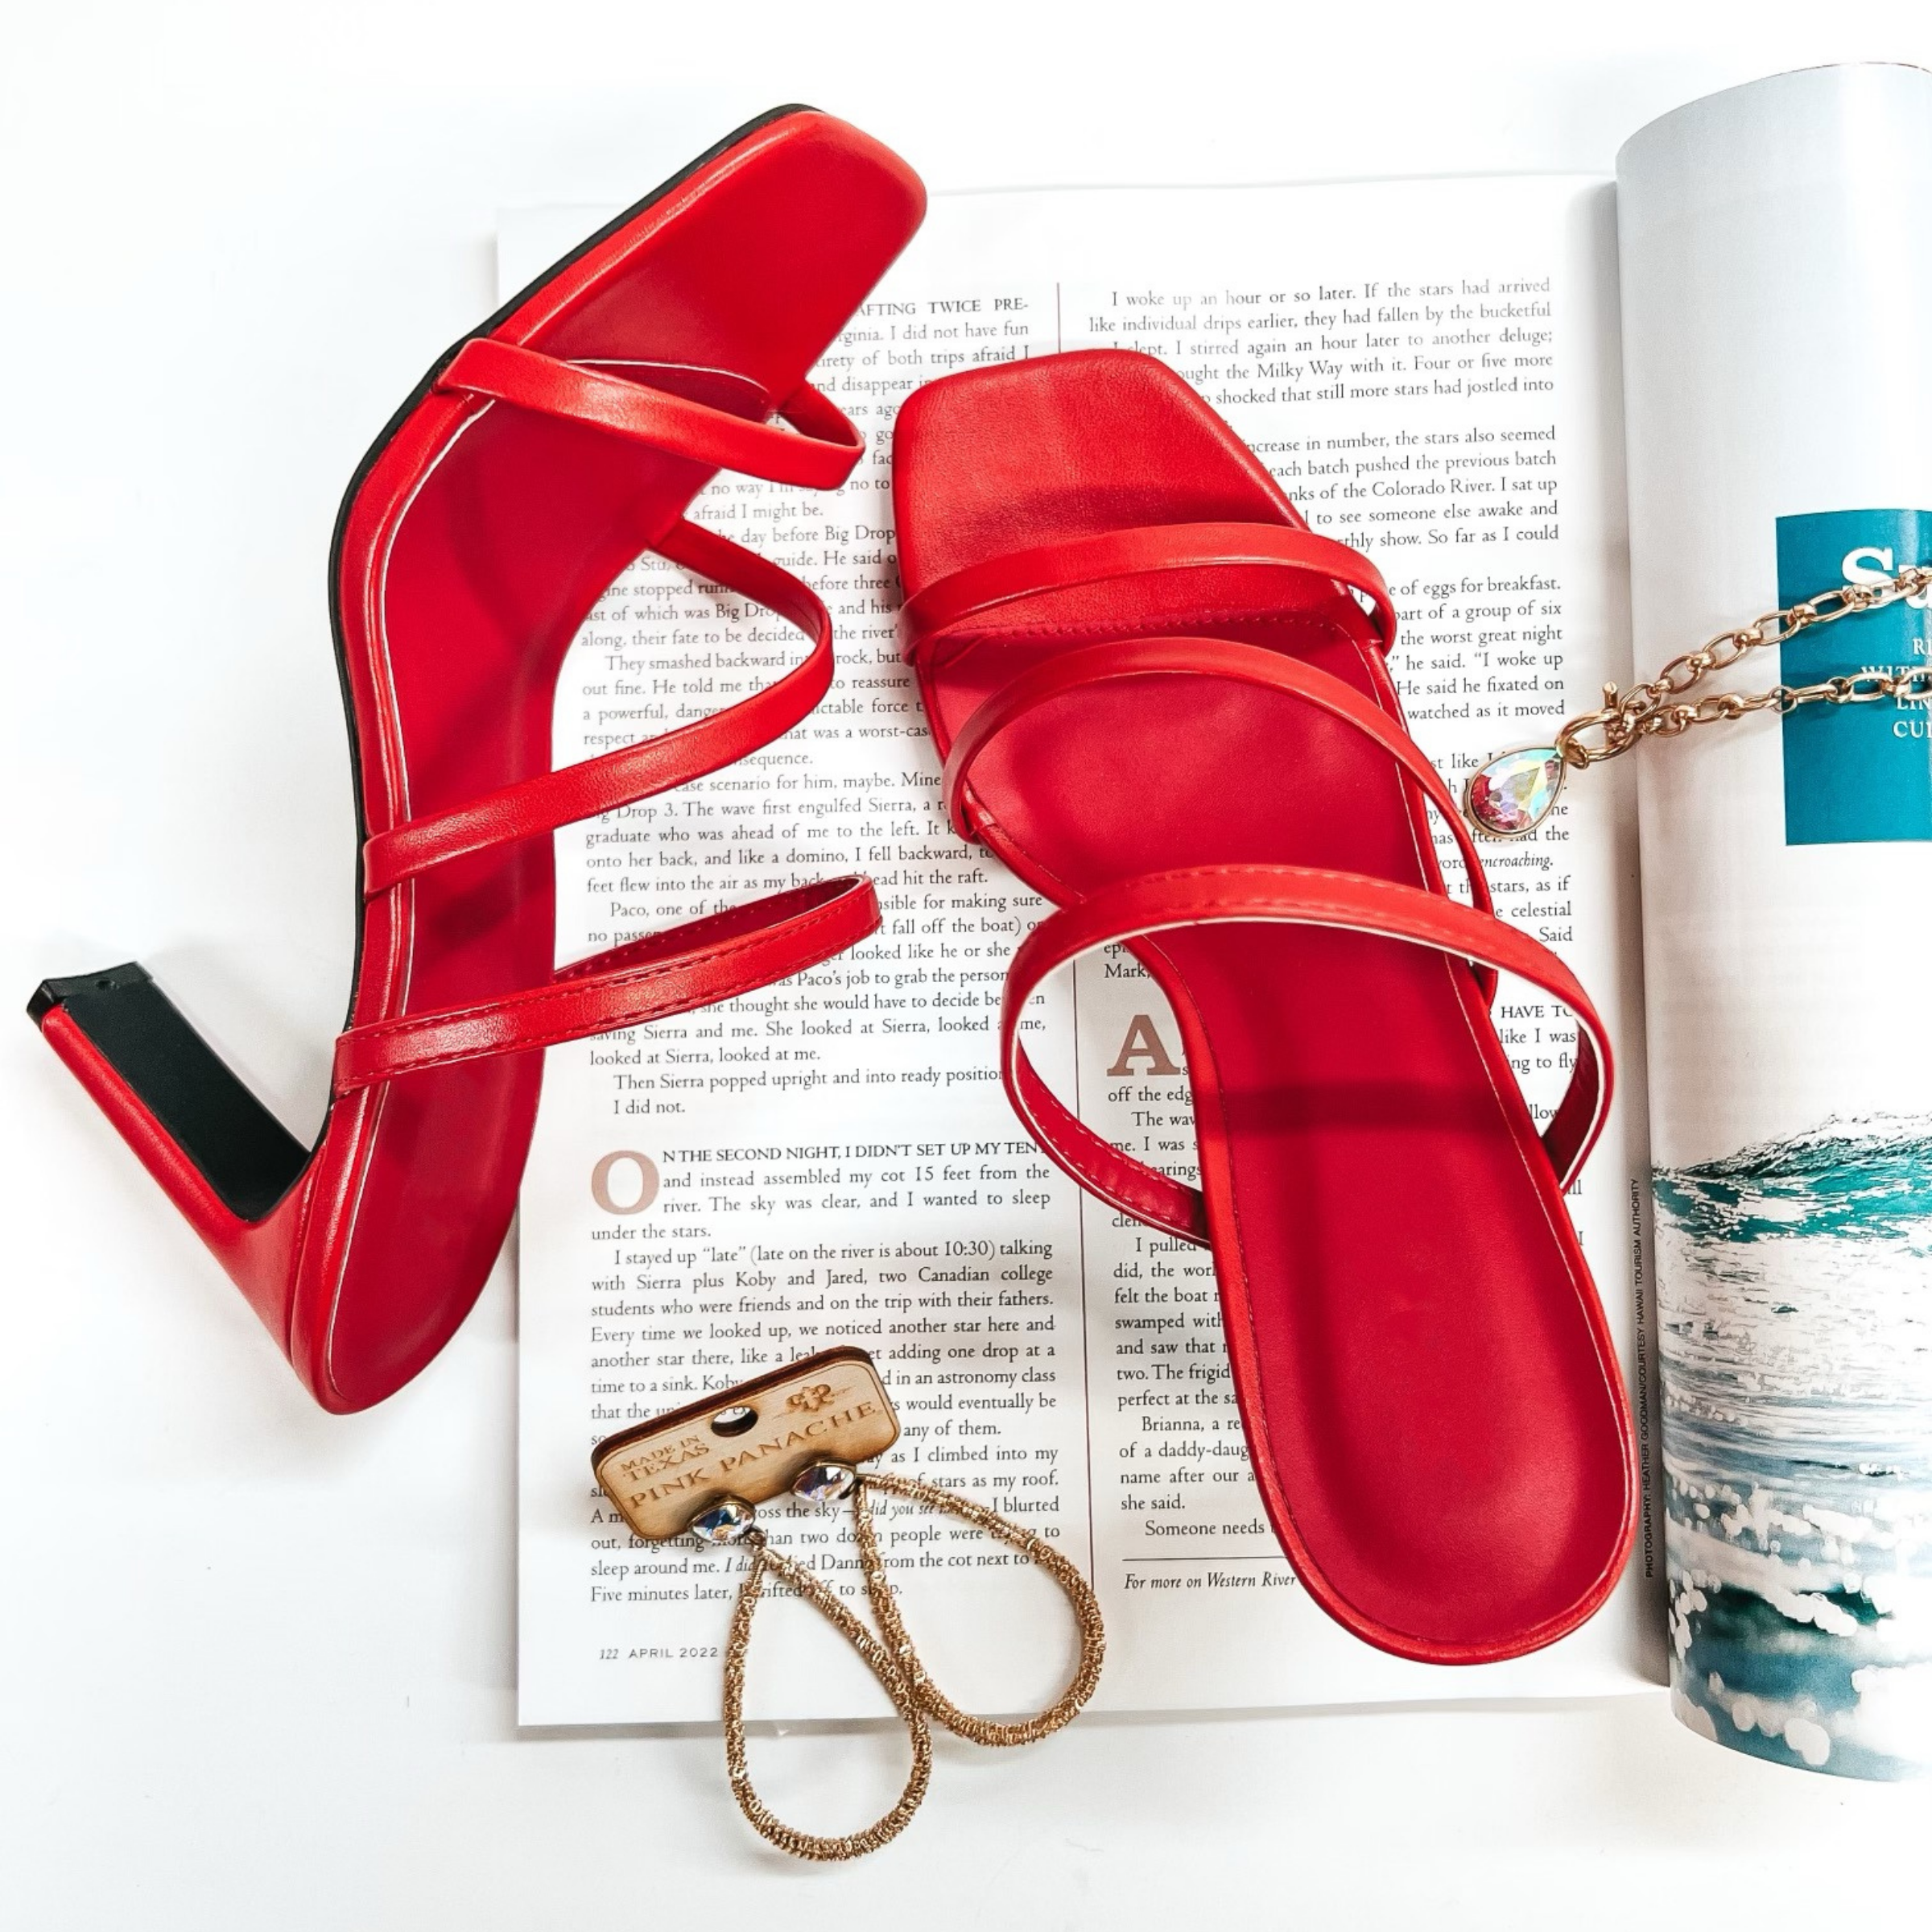 A pair of  red strappy heels with a square toe. These shoes are pictured on a white background with gold jewelry and a magazine.